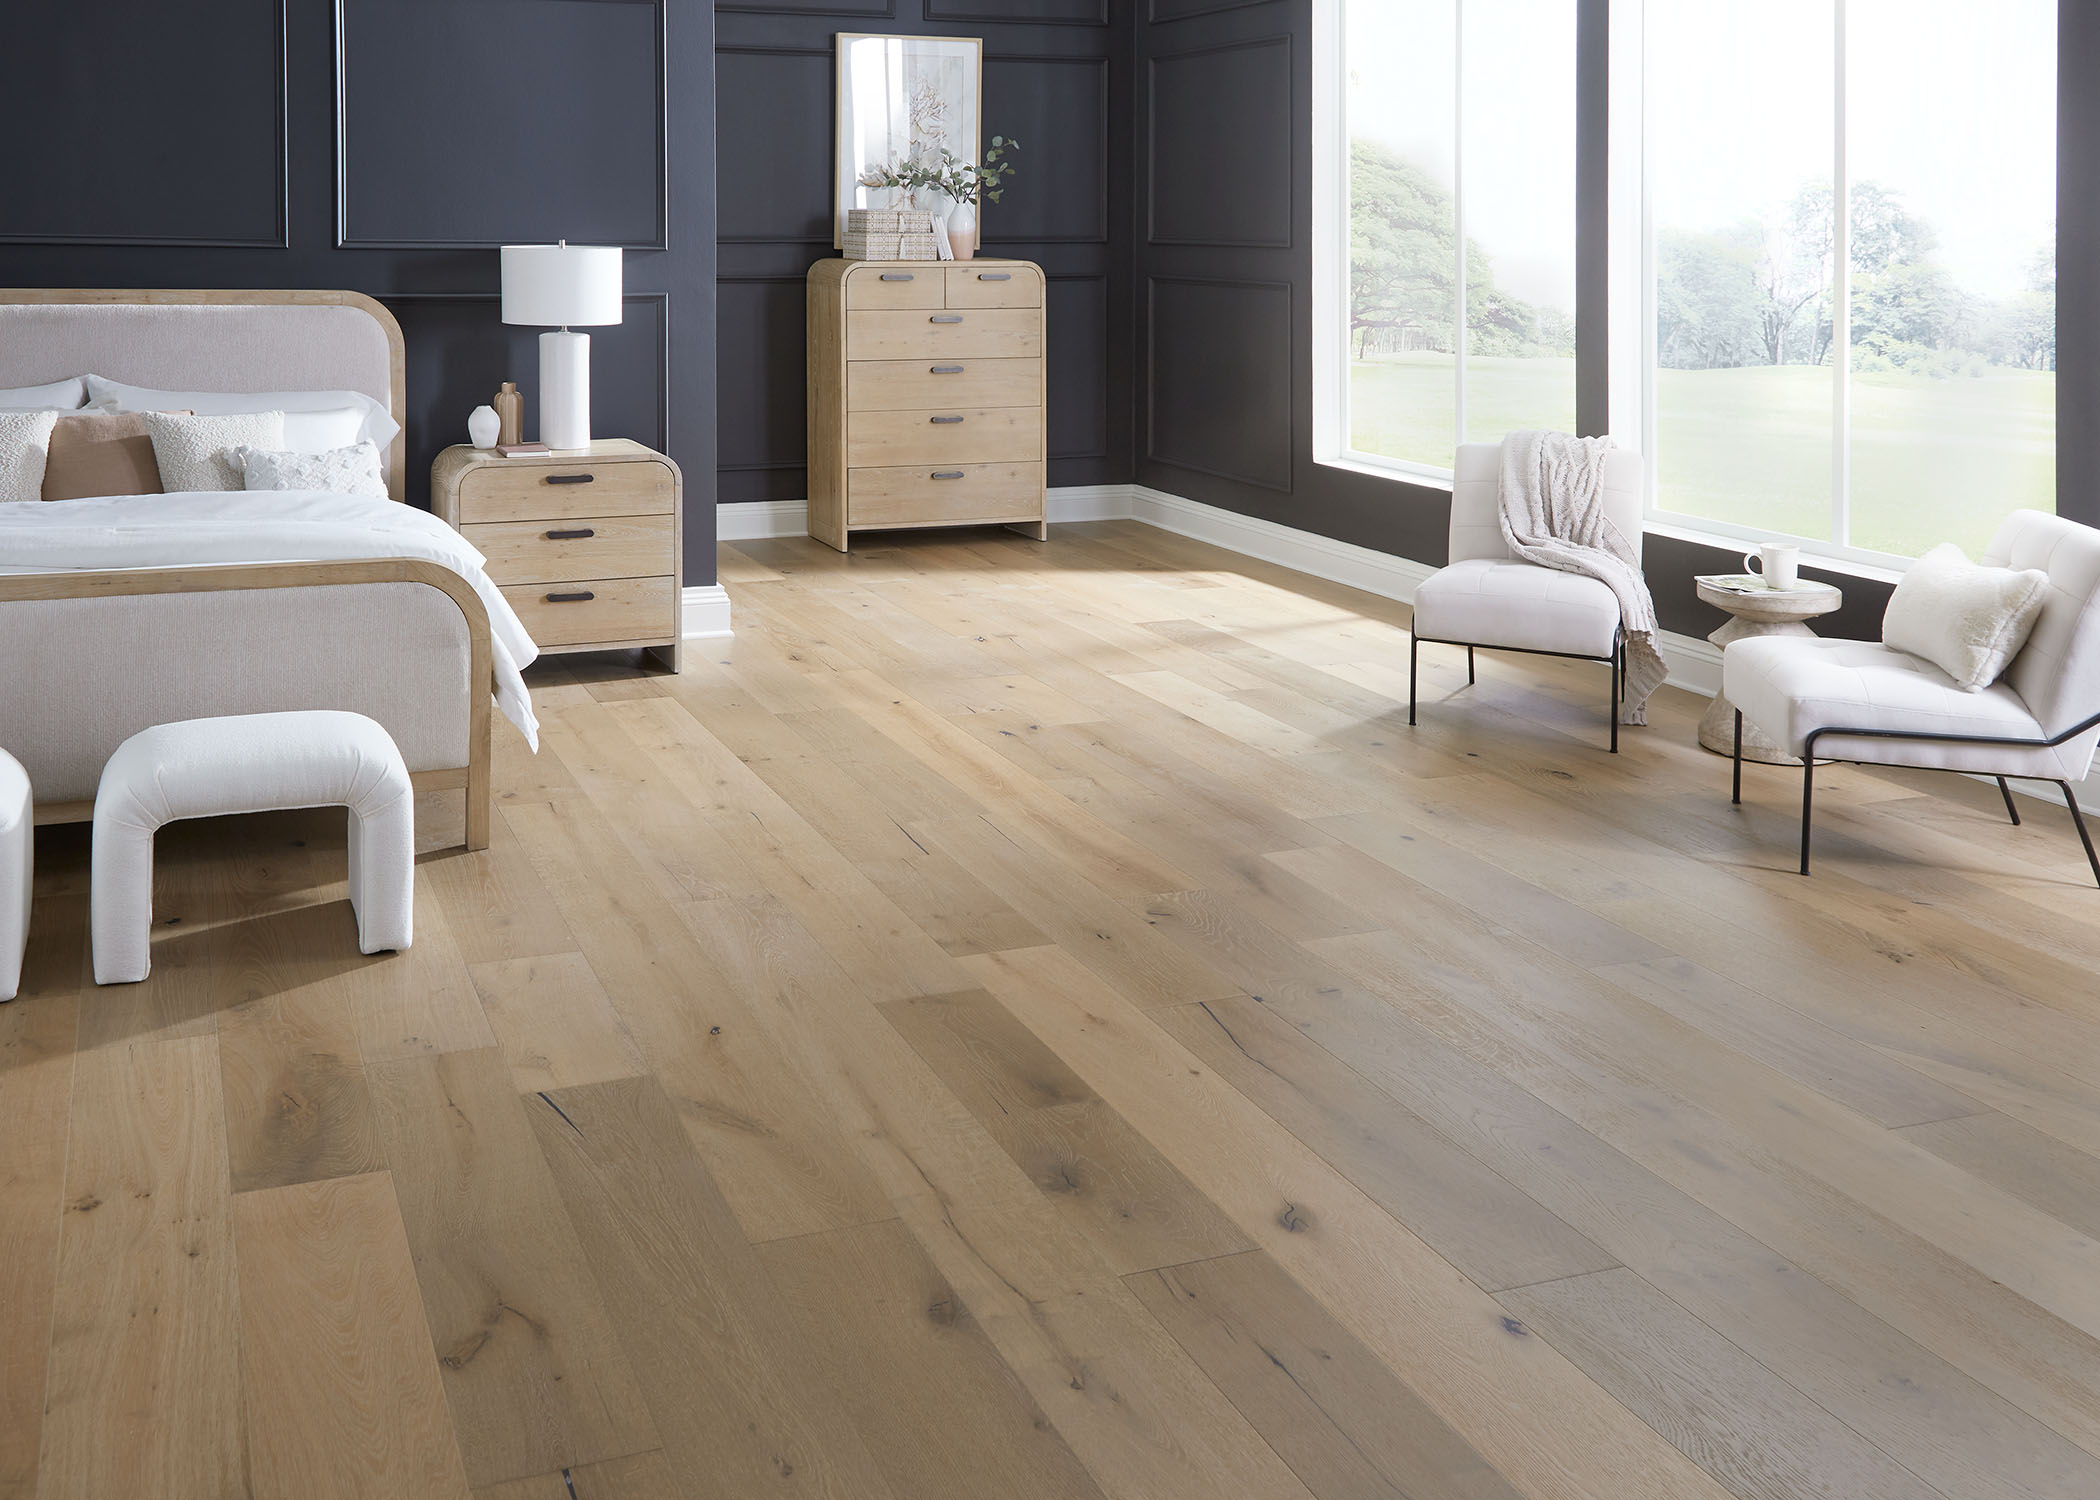 blonde engineered hardwood floor in bedroom with black walls plus white upholstered armless chairs and blonde wood furnishings